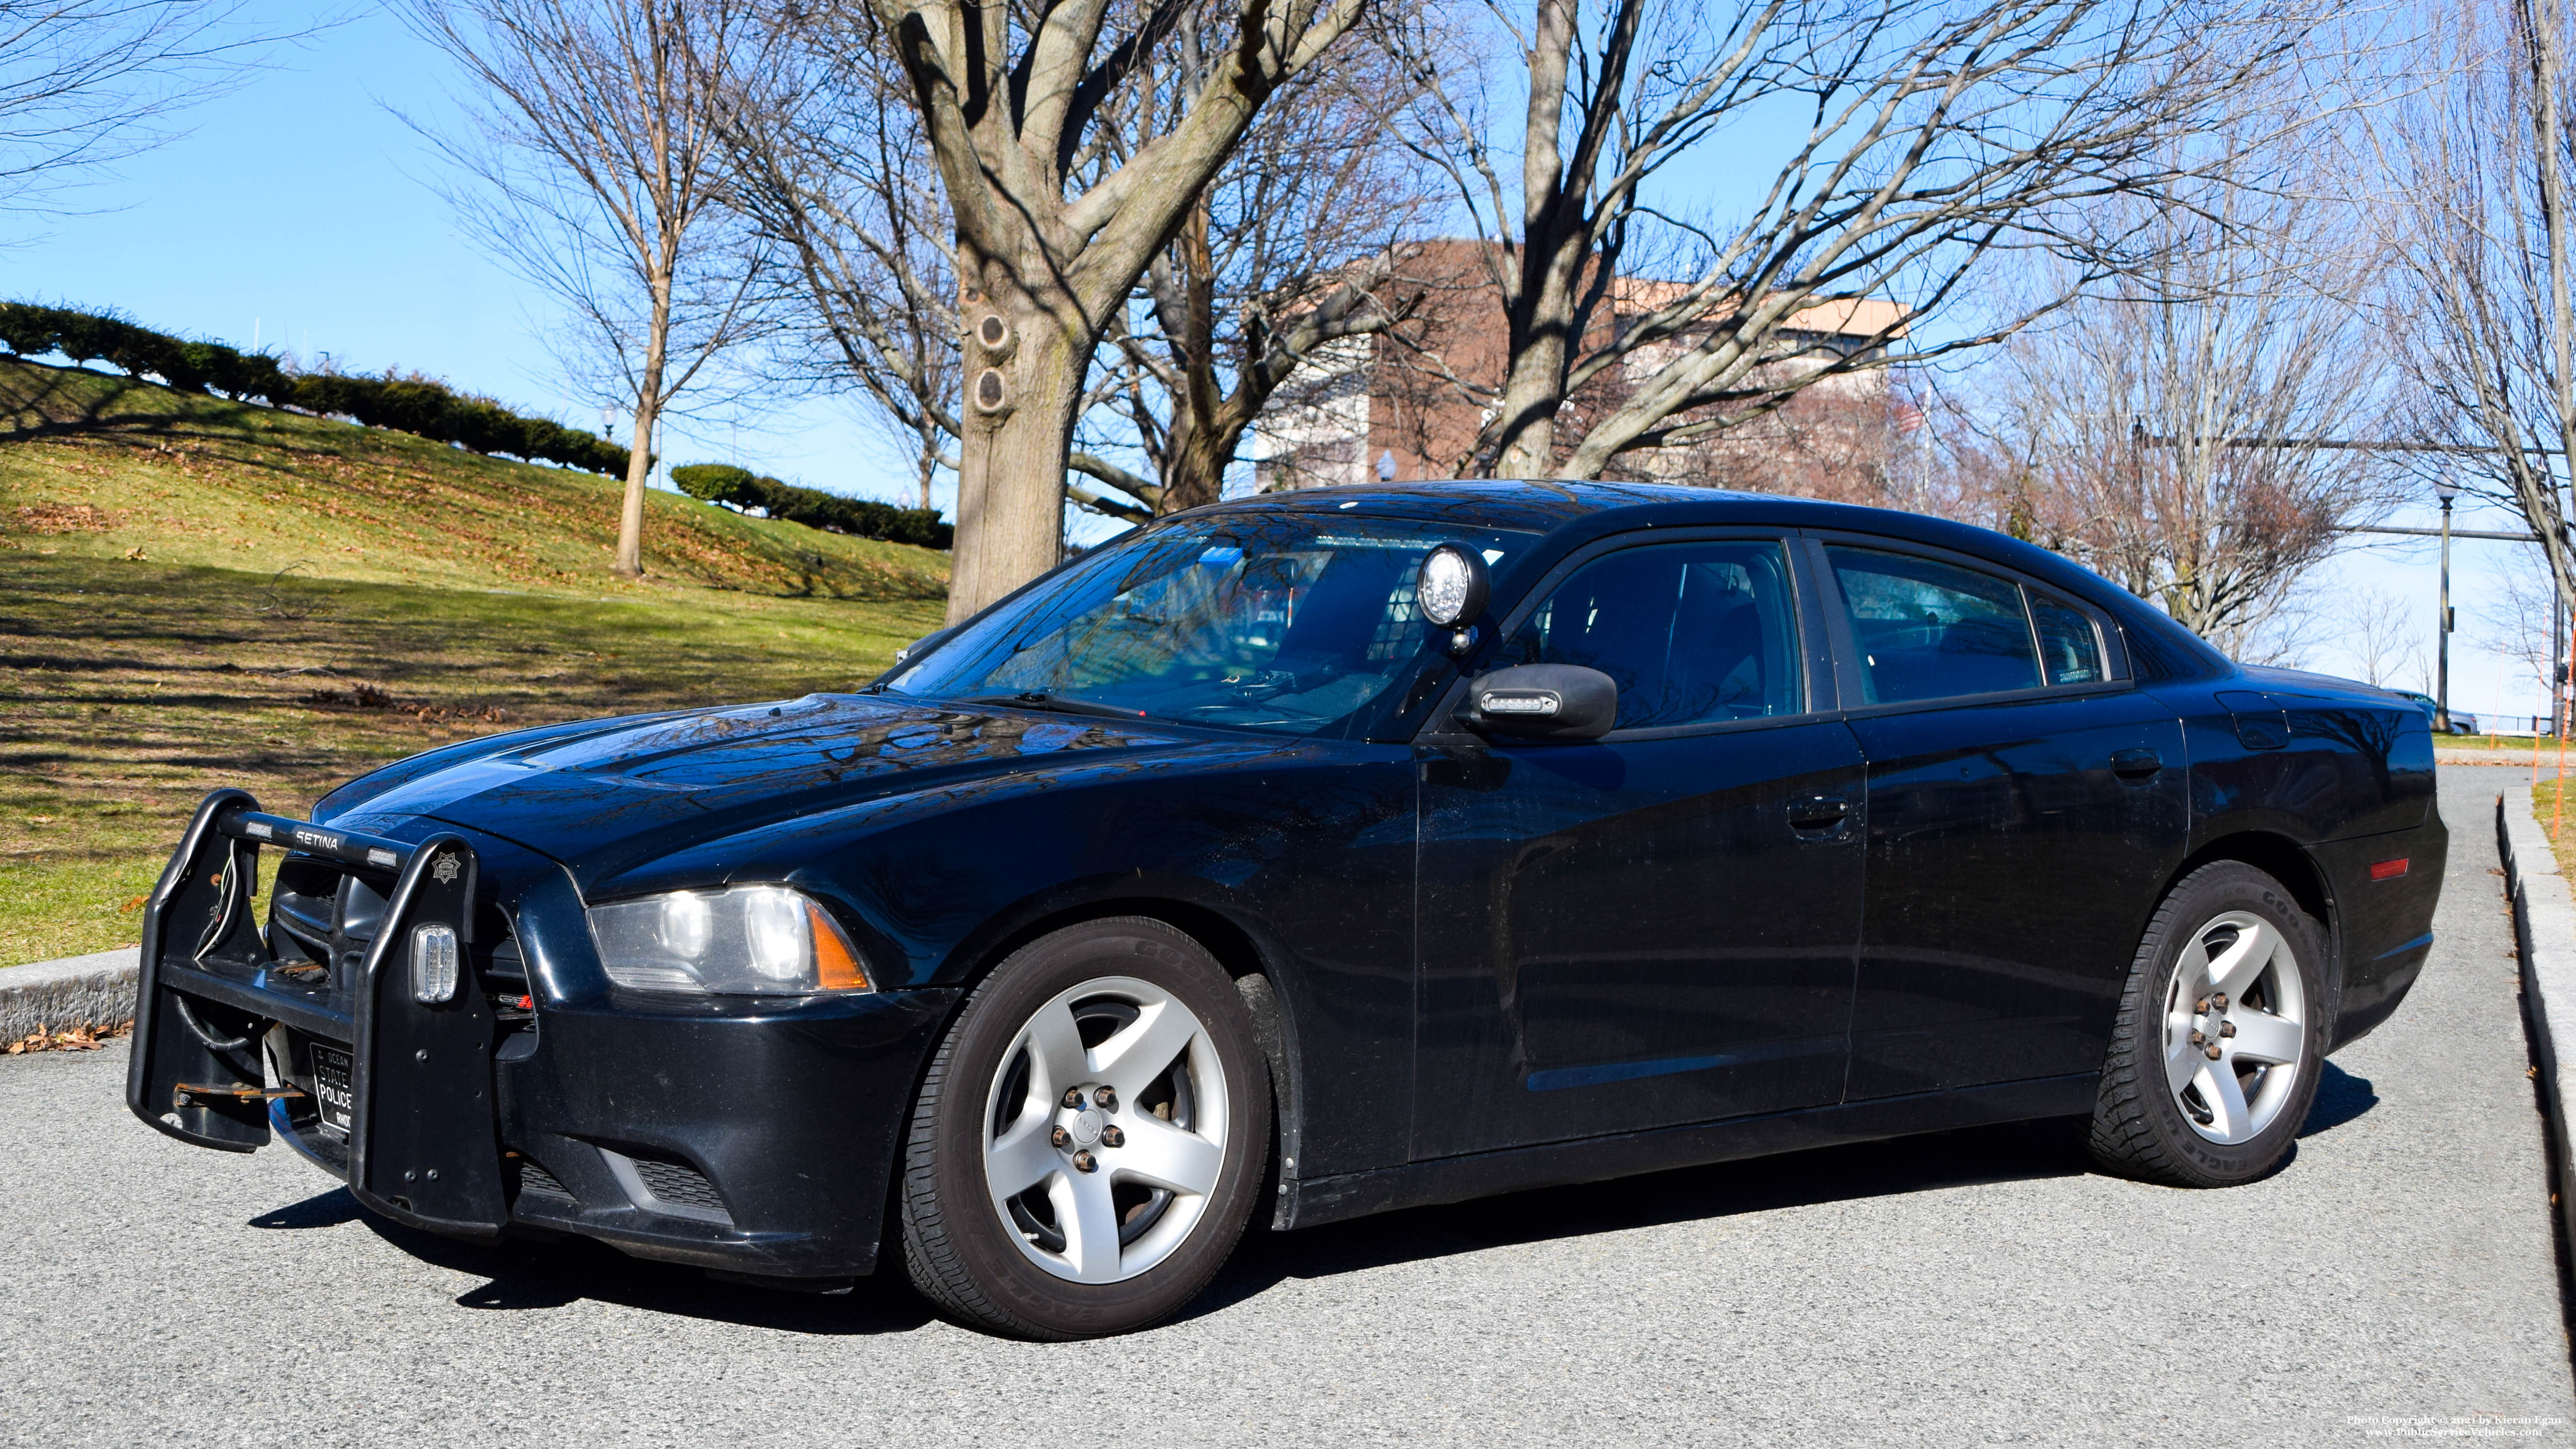 A photo  of Rhode Island State Police
            Cruiser 903, a 2013 Dodge Charger             taken by Kieran Egan